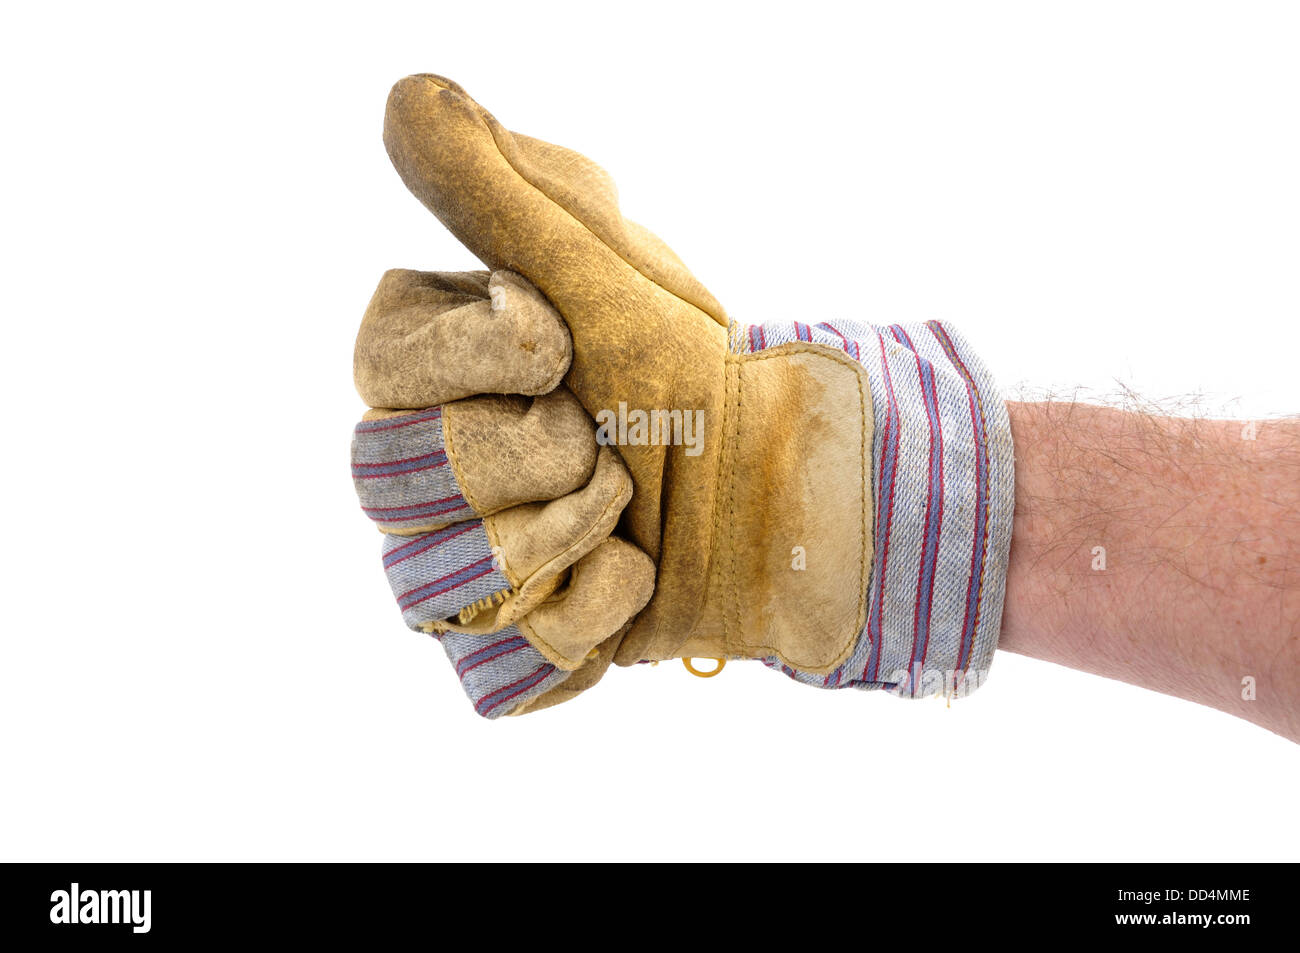 Worker Wearing Leather Work Glove Giving the OK Thumbs Up sign gesture Stock Photo